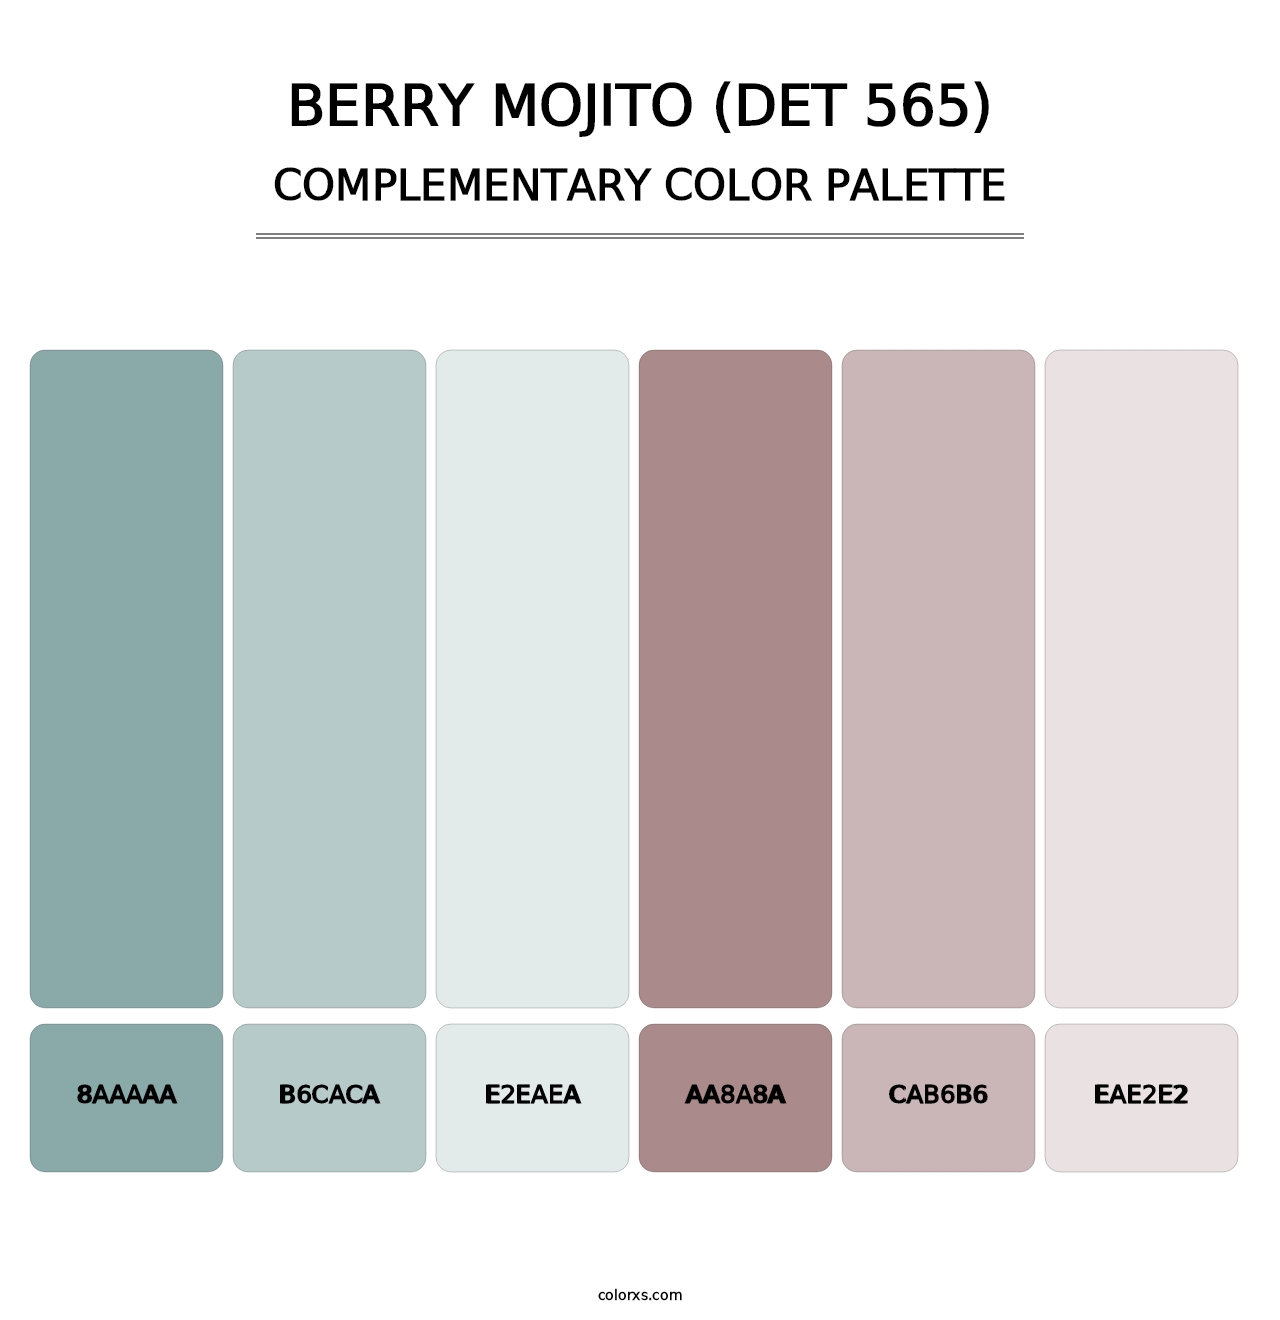 Berry Mojito (DET 565) - Complementary Color Palette